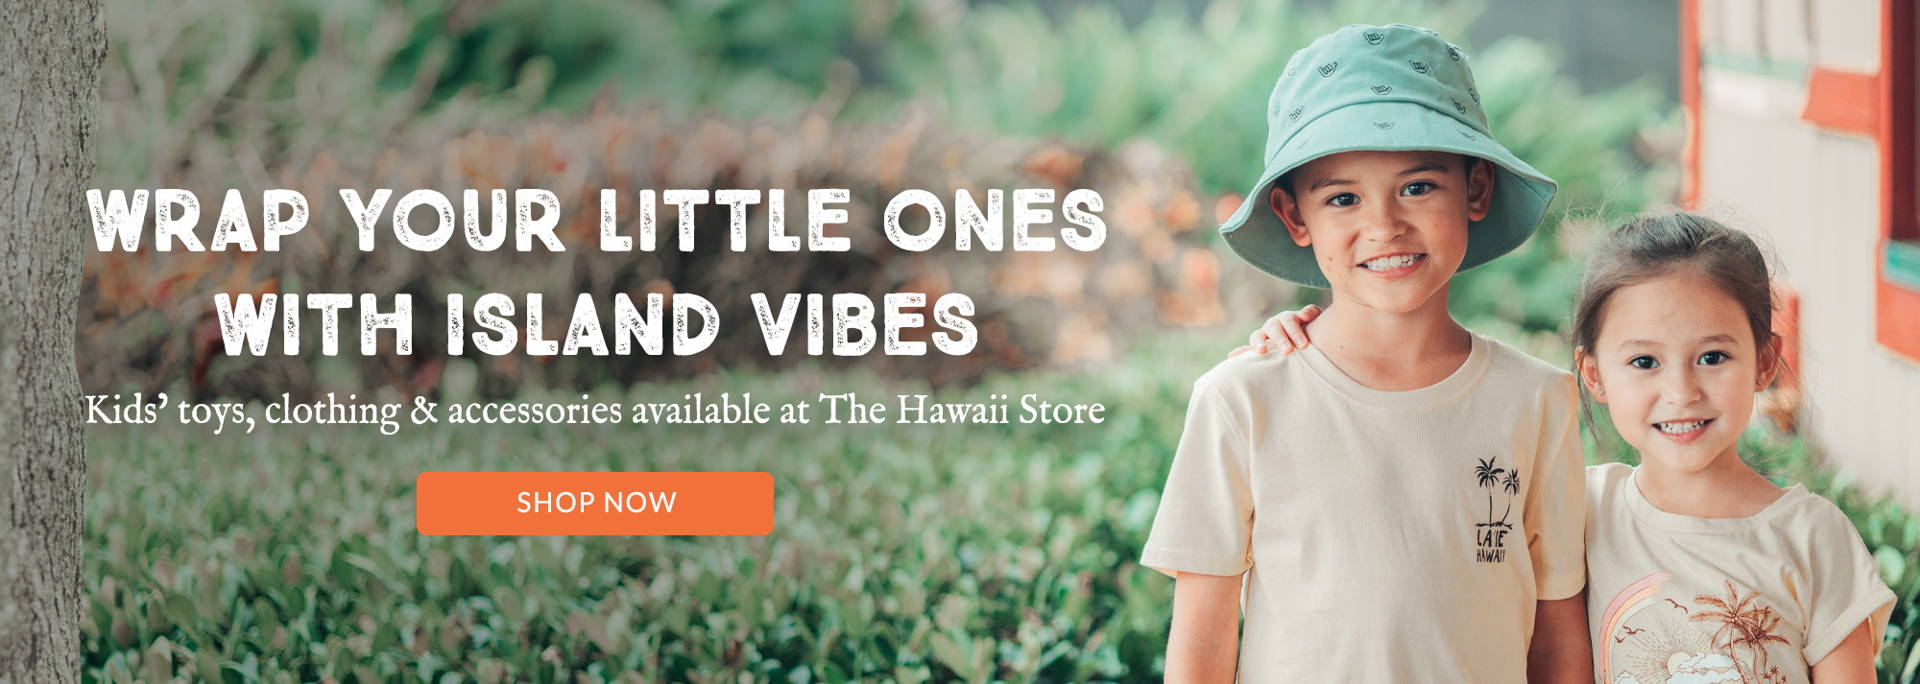 Discover the joy of island living with every purchase from our Kids' Collection at The Hawaii Store. Each gift brings a piece of paradise to your little ones. Explore now and share the experience!